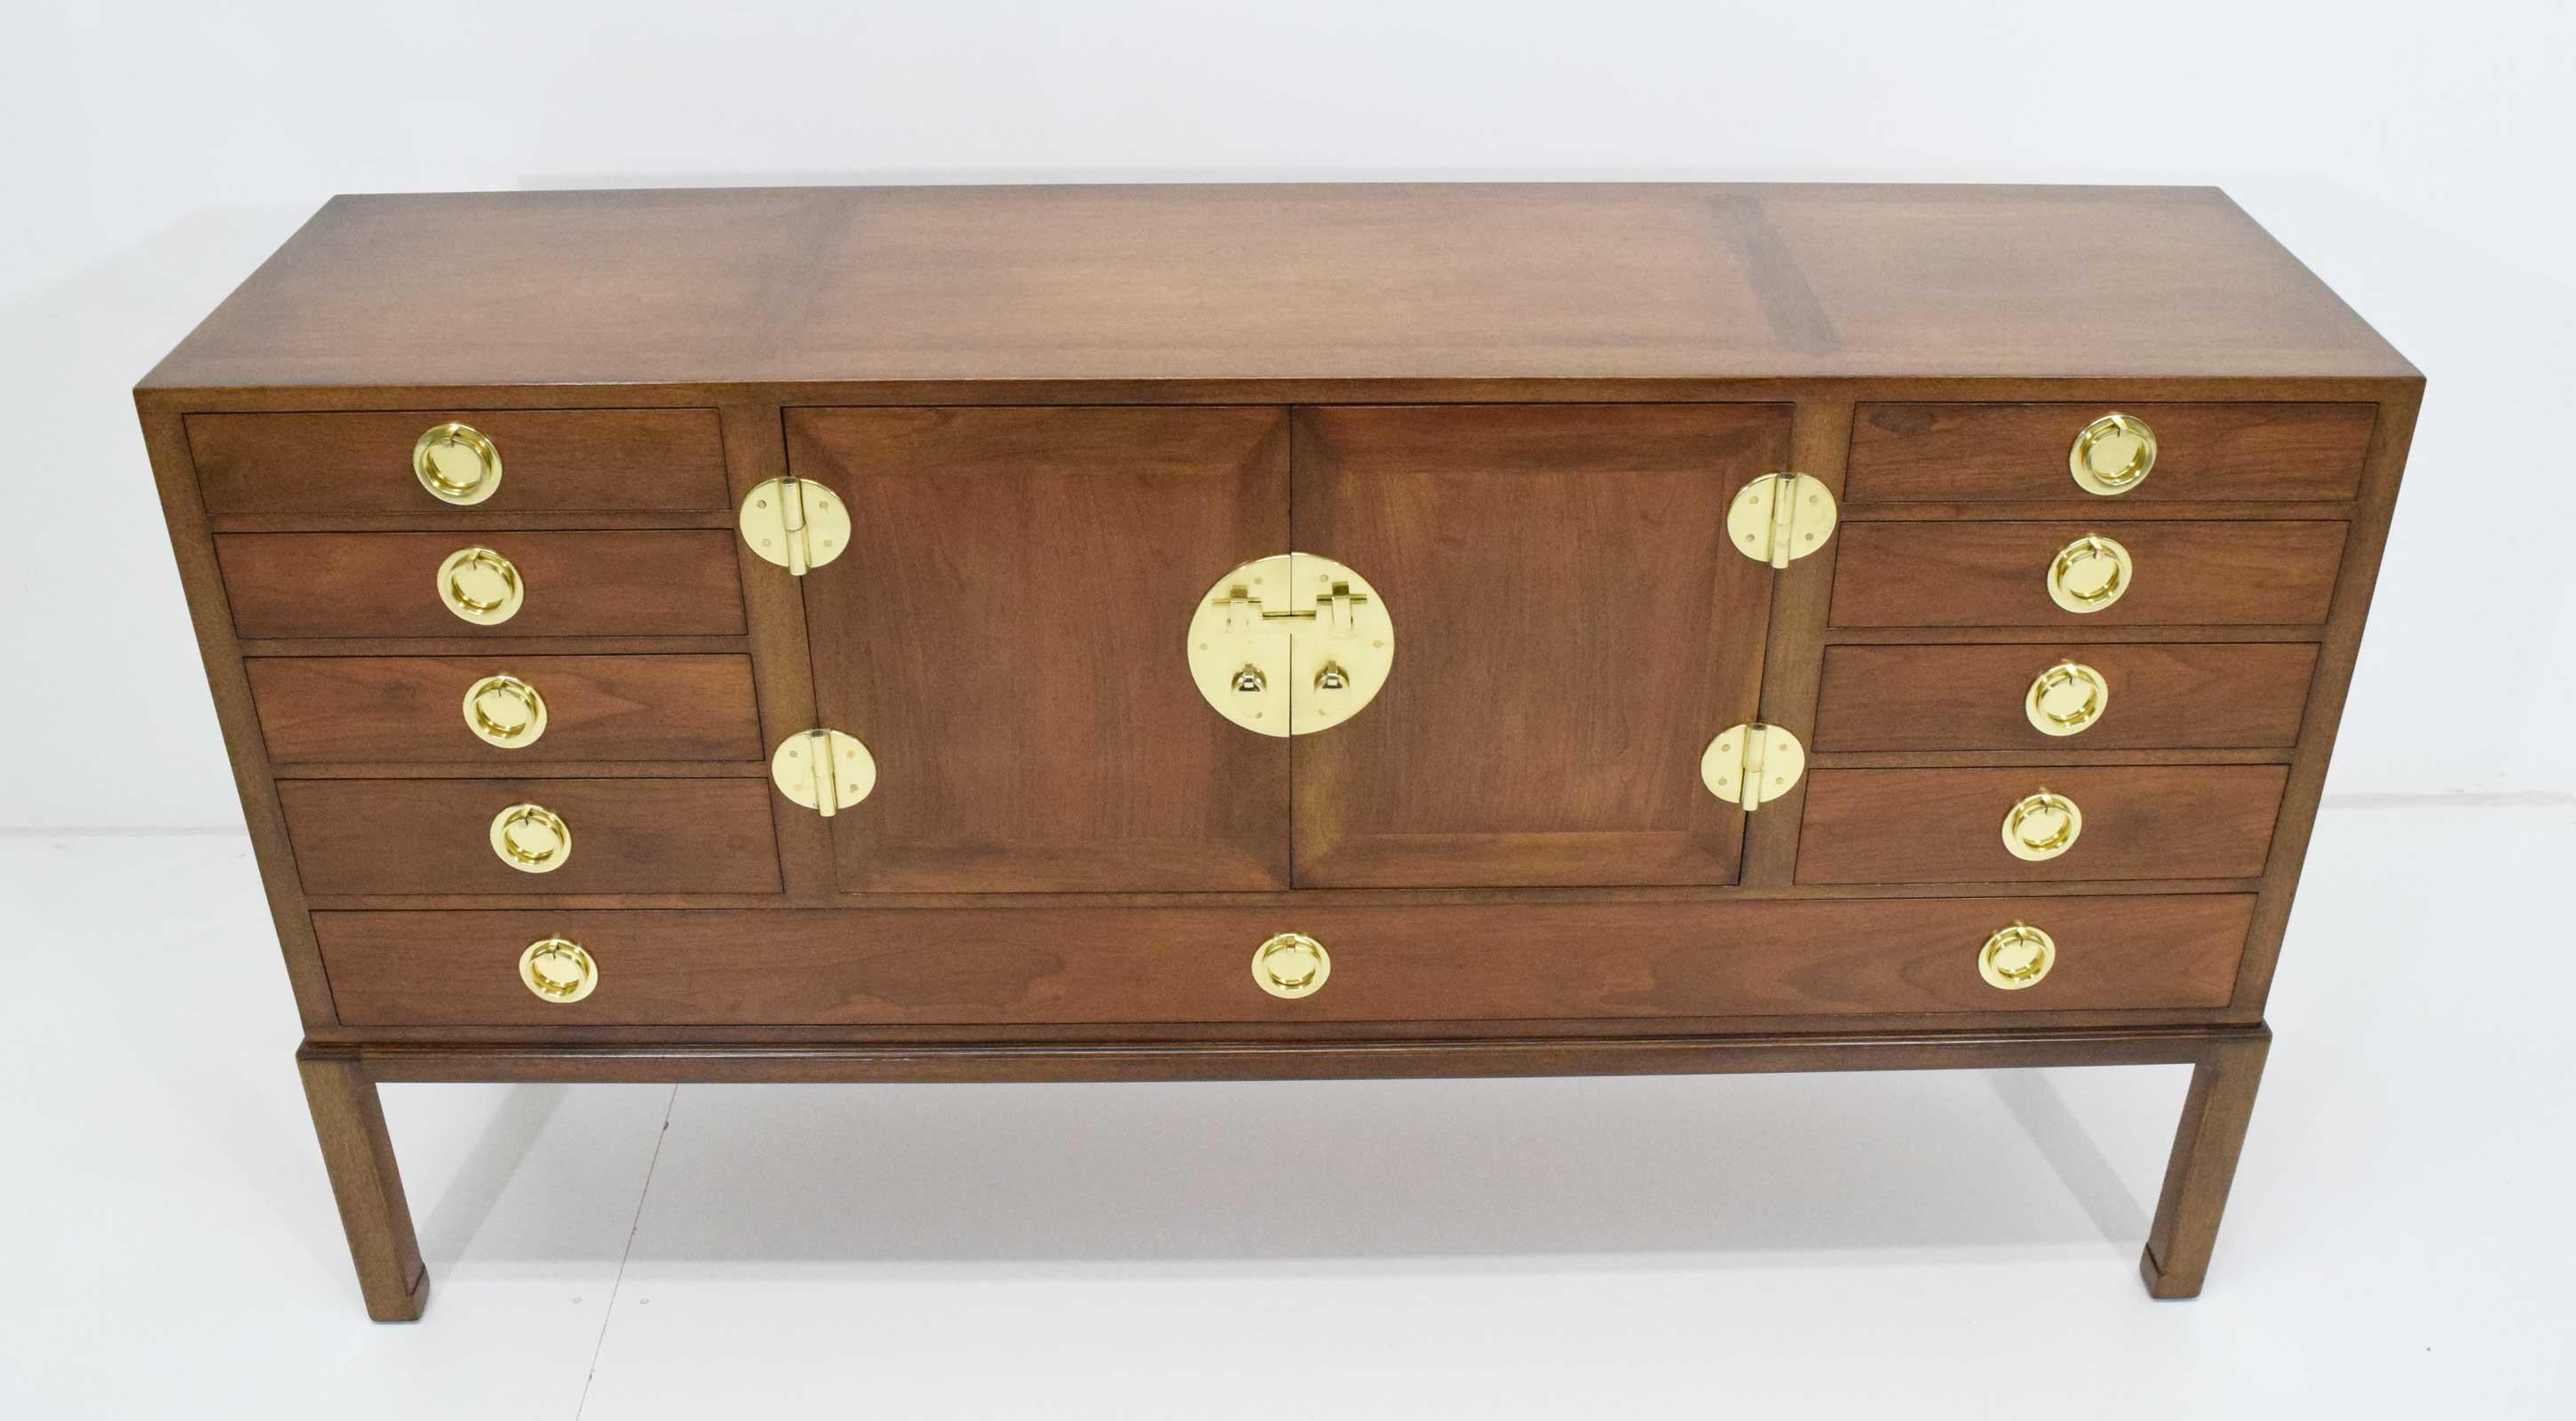 Beautiful sideboard cabinet designed by Edward Wormley for Dunbar, made of sandalwood with solid brass hardware. Cabinet has drawers on each side, center Lucite pull out shelf and one glass interior shelf. Three drawers with interior utility trays.